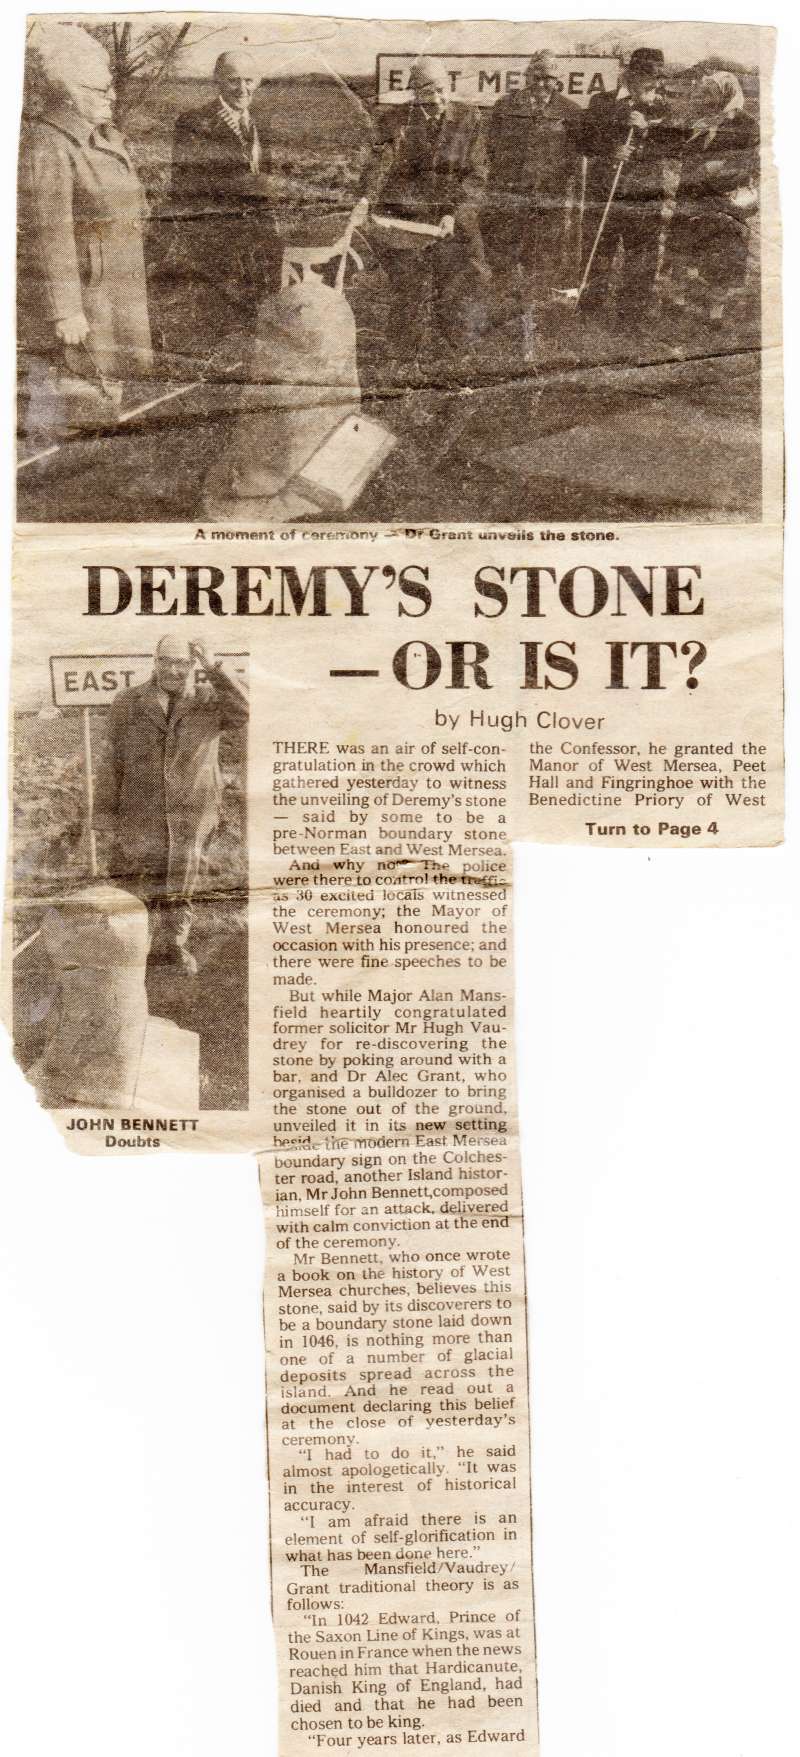  Deremy's Stone, or is it? by Hugh Glover.

Top photo - A moment of ceremony - Dr Grant unveils the stone.

Left photo: John Bennett. Doubts.




Crowd gathered to witness the unveiling of Deremy's stone - said by some to be a pre-Norman boundary stone between East and West Mersea.

Among those present - Major Alan Mansfield, Hugh Vaudrey, Dr Alec Grant and John ...
Cat1 Mersea-->East